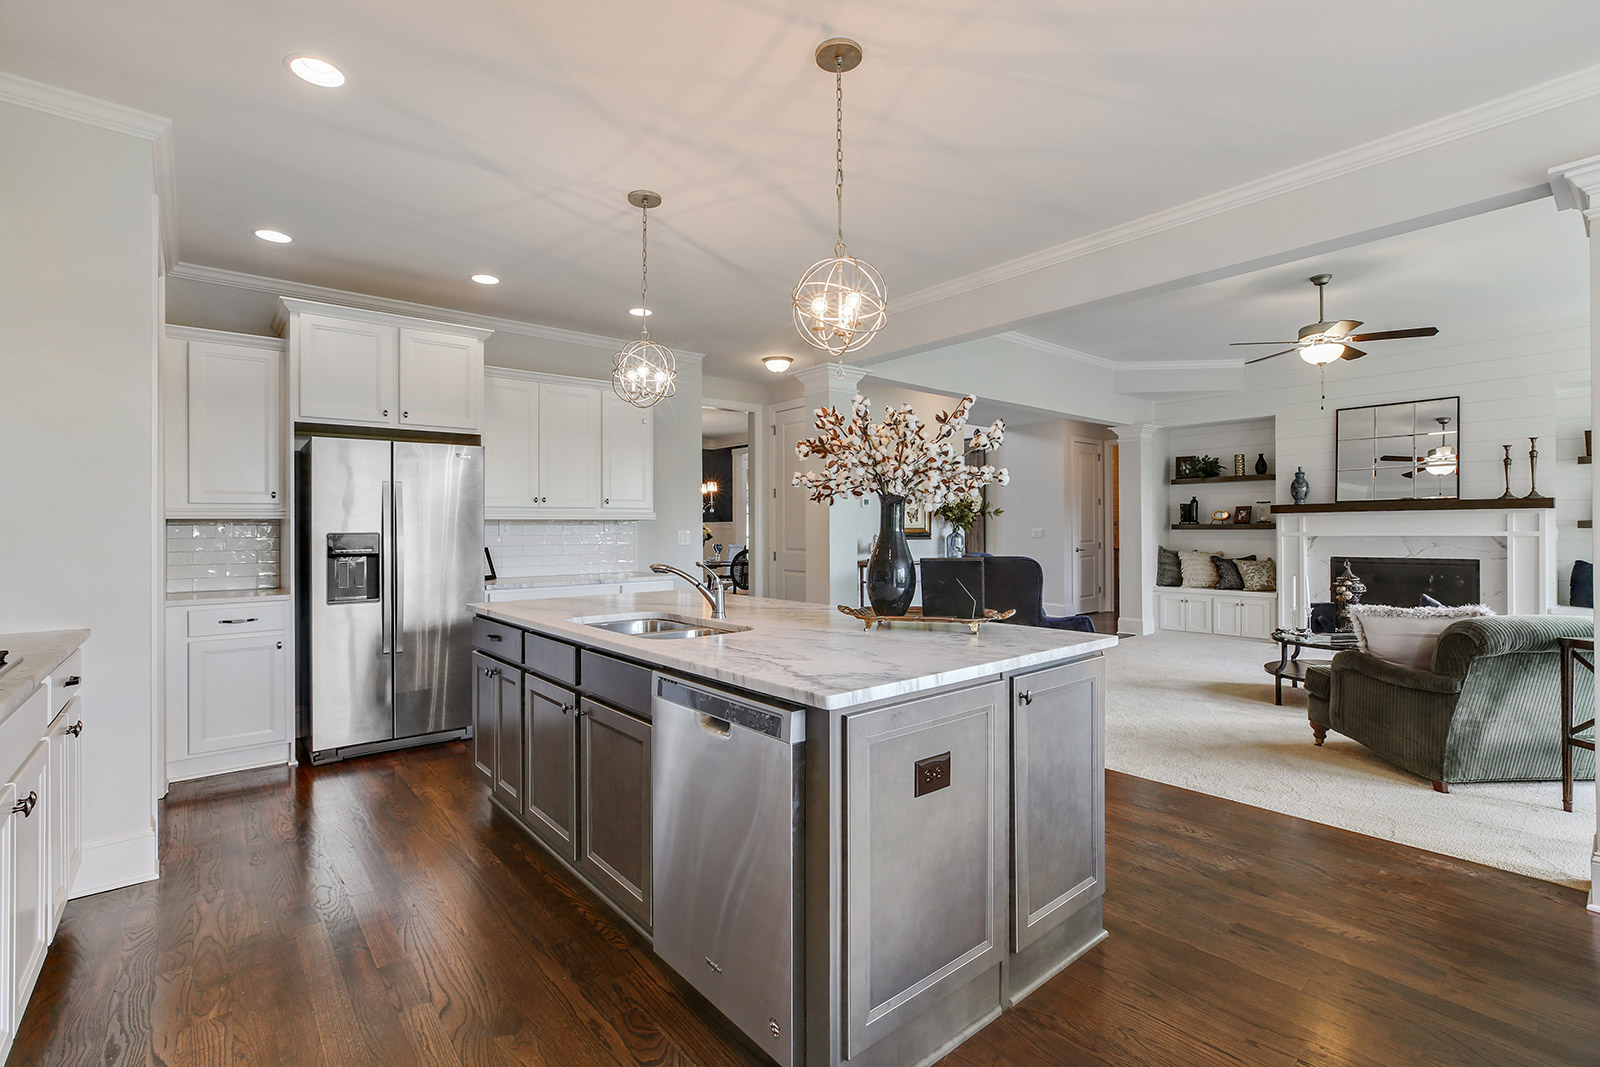 harcrest homes kitchen interior with large kitchen island and flexible concept